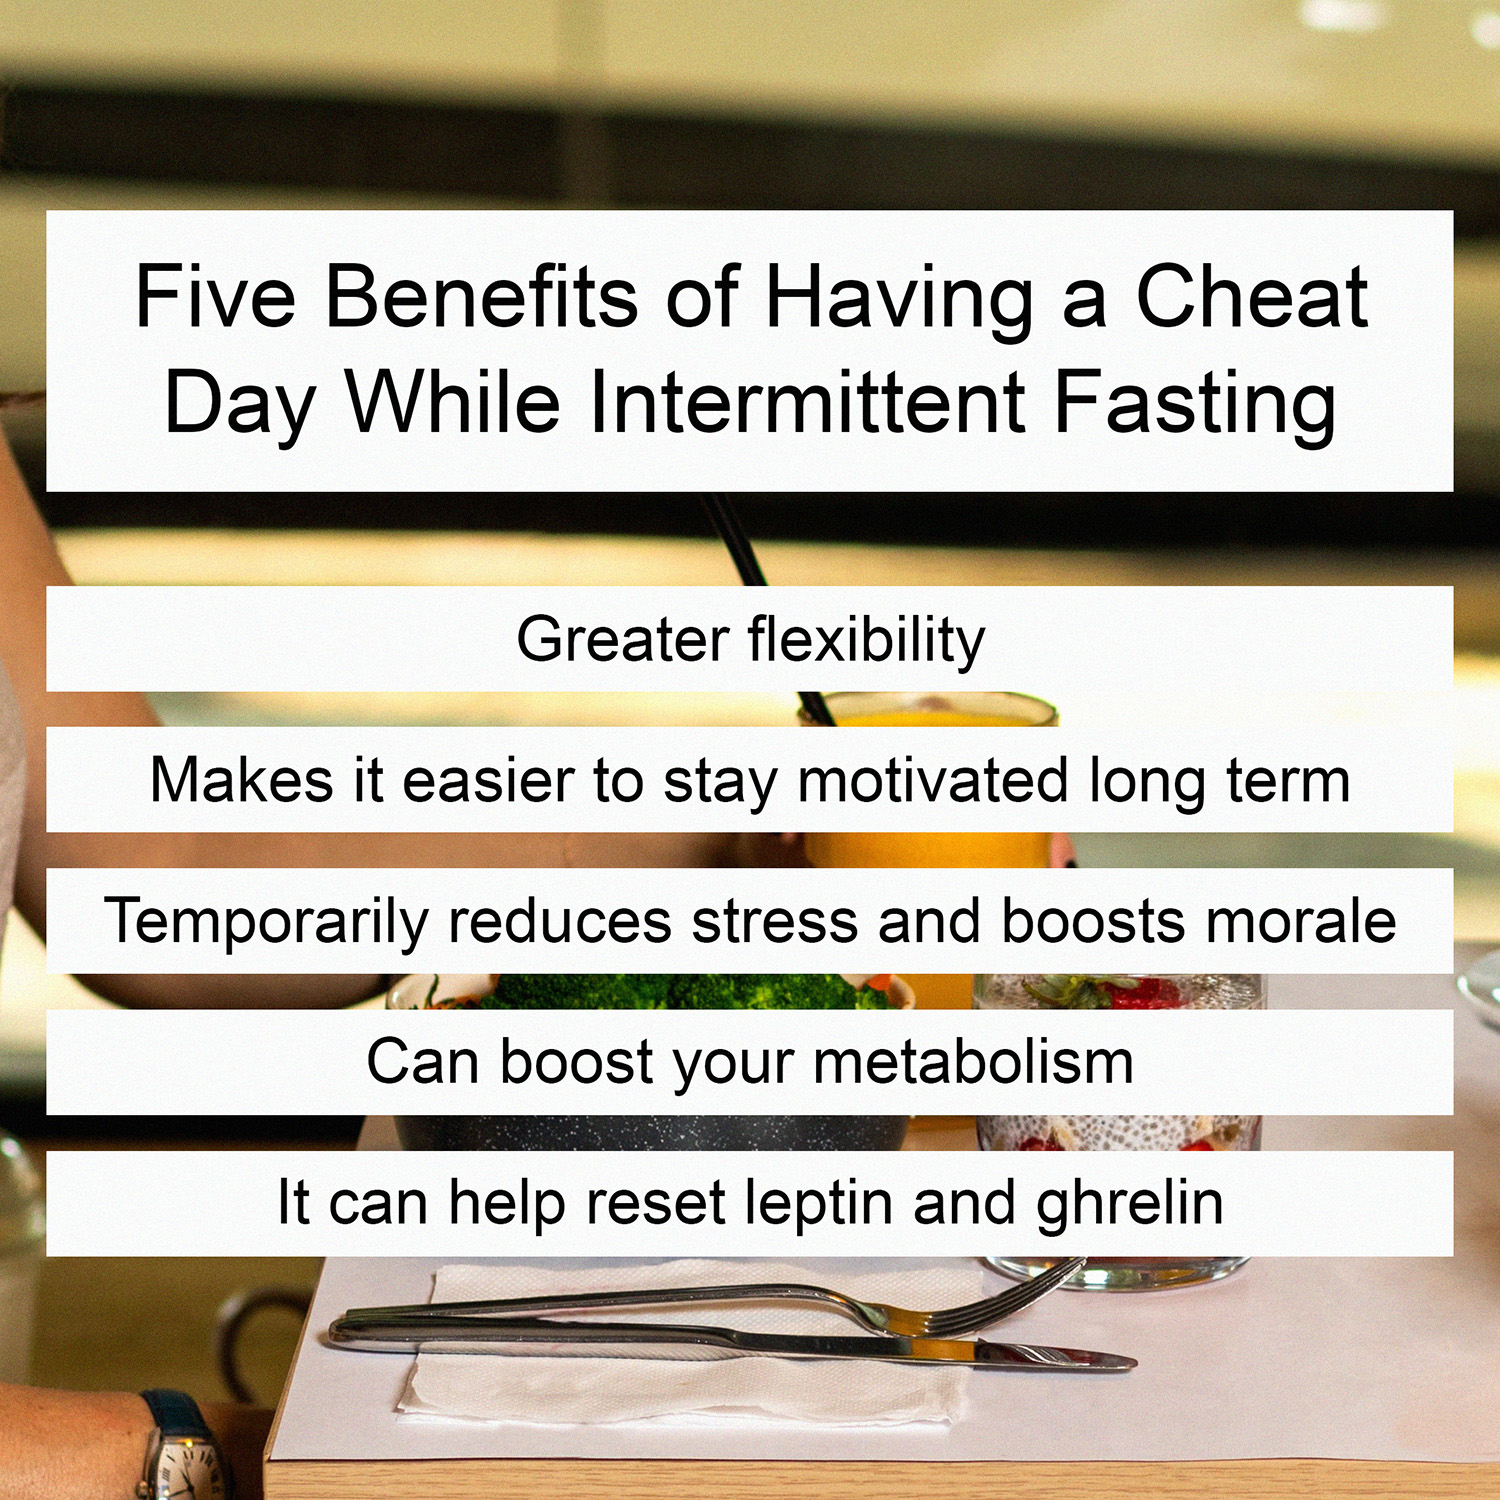 cheat day intermittent fasting